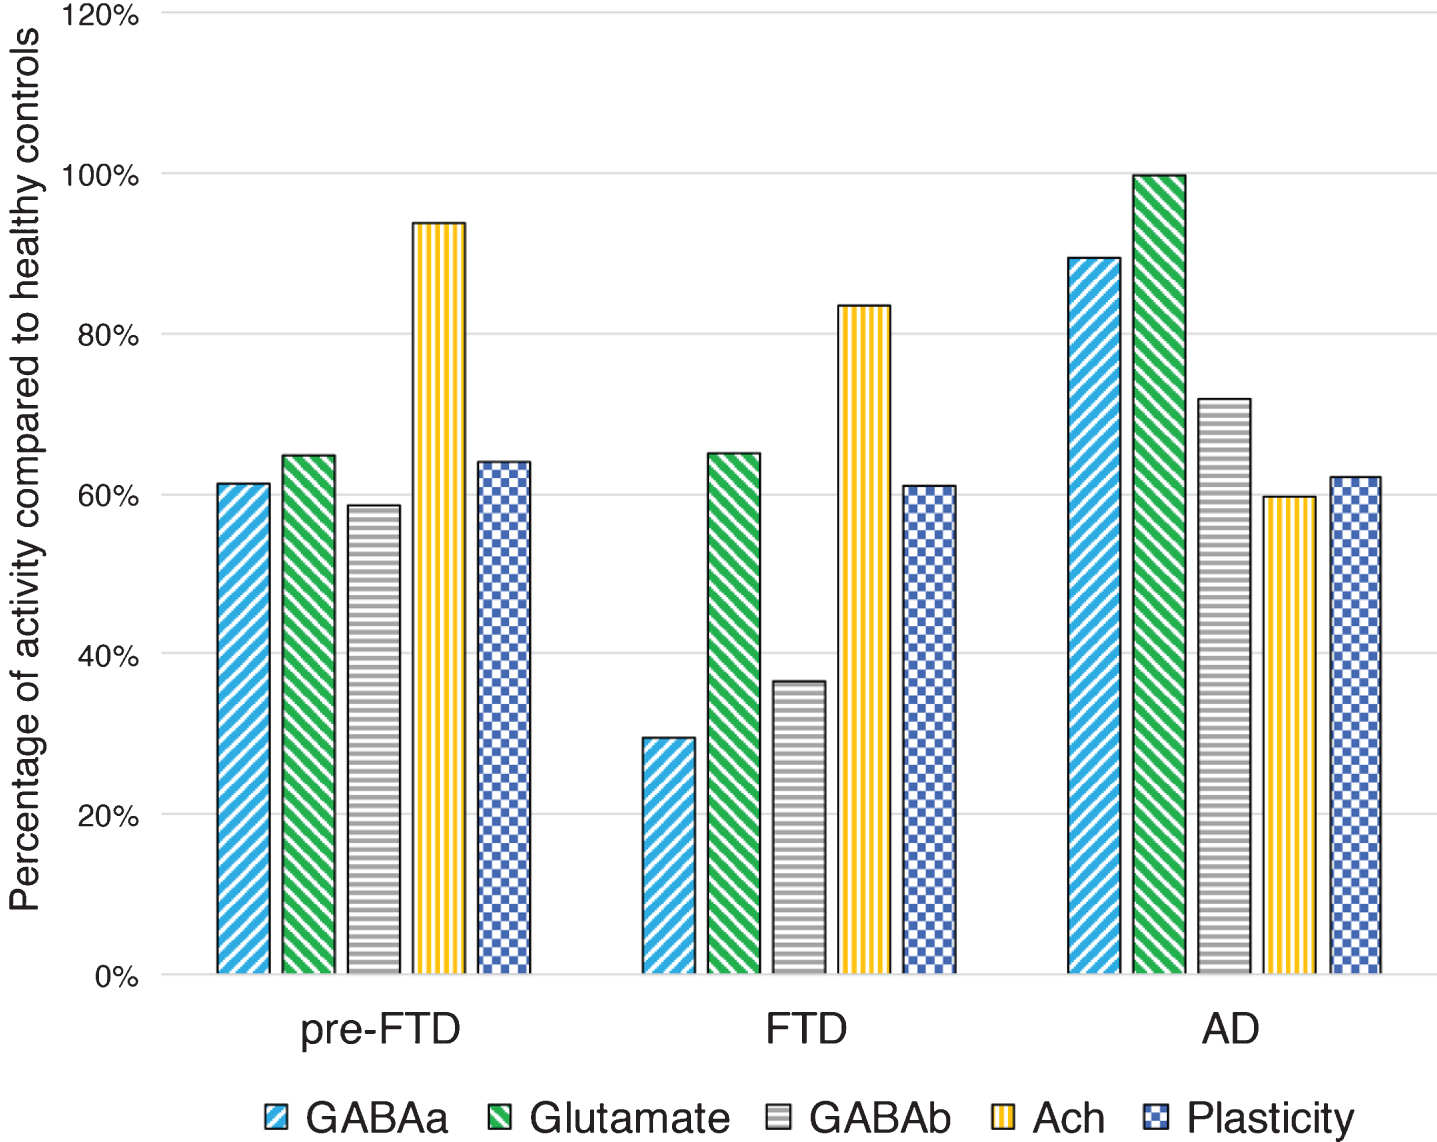 Intracortical connectivity and LTP-like plasticity profiles in presymptomatic GRN carriers, in symptomatic FTD and AD patients, compared to healthy controls. Pre-FTD, presymptomatic granulin (GRN) carriers; FTD, frontotemporal dementia patients; AD, Alzheimer’s disease patients; GABAa, GABAAergic activity evaluated with average short interval intracortical inhibition (1, 2, 3 ms); Glutamate, glutamatergic activity evaluated with average intracortical facilitation (7, 10, 15 ms); GABAB, GABABergic activity evaluated with average long interval intracortical inhibition (50, 100, 150 ms); Ach, cholinergic activity evaluated with average short latency afferent inhibition ( +0,  +4 ms); Plasticity, LTP-like plasticity evaluated with paired associative stimulation (mean  +10,  +20,  +30 min). Values are expressed as percentage of activity in healthy controls.